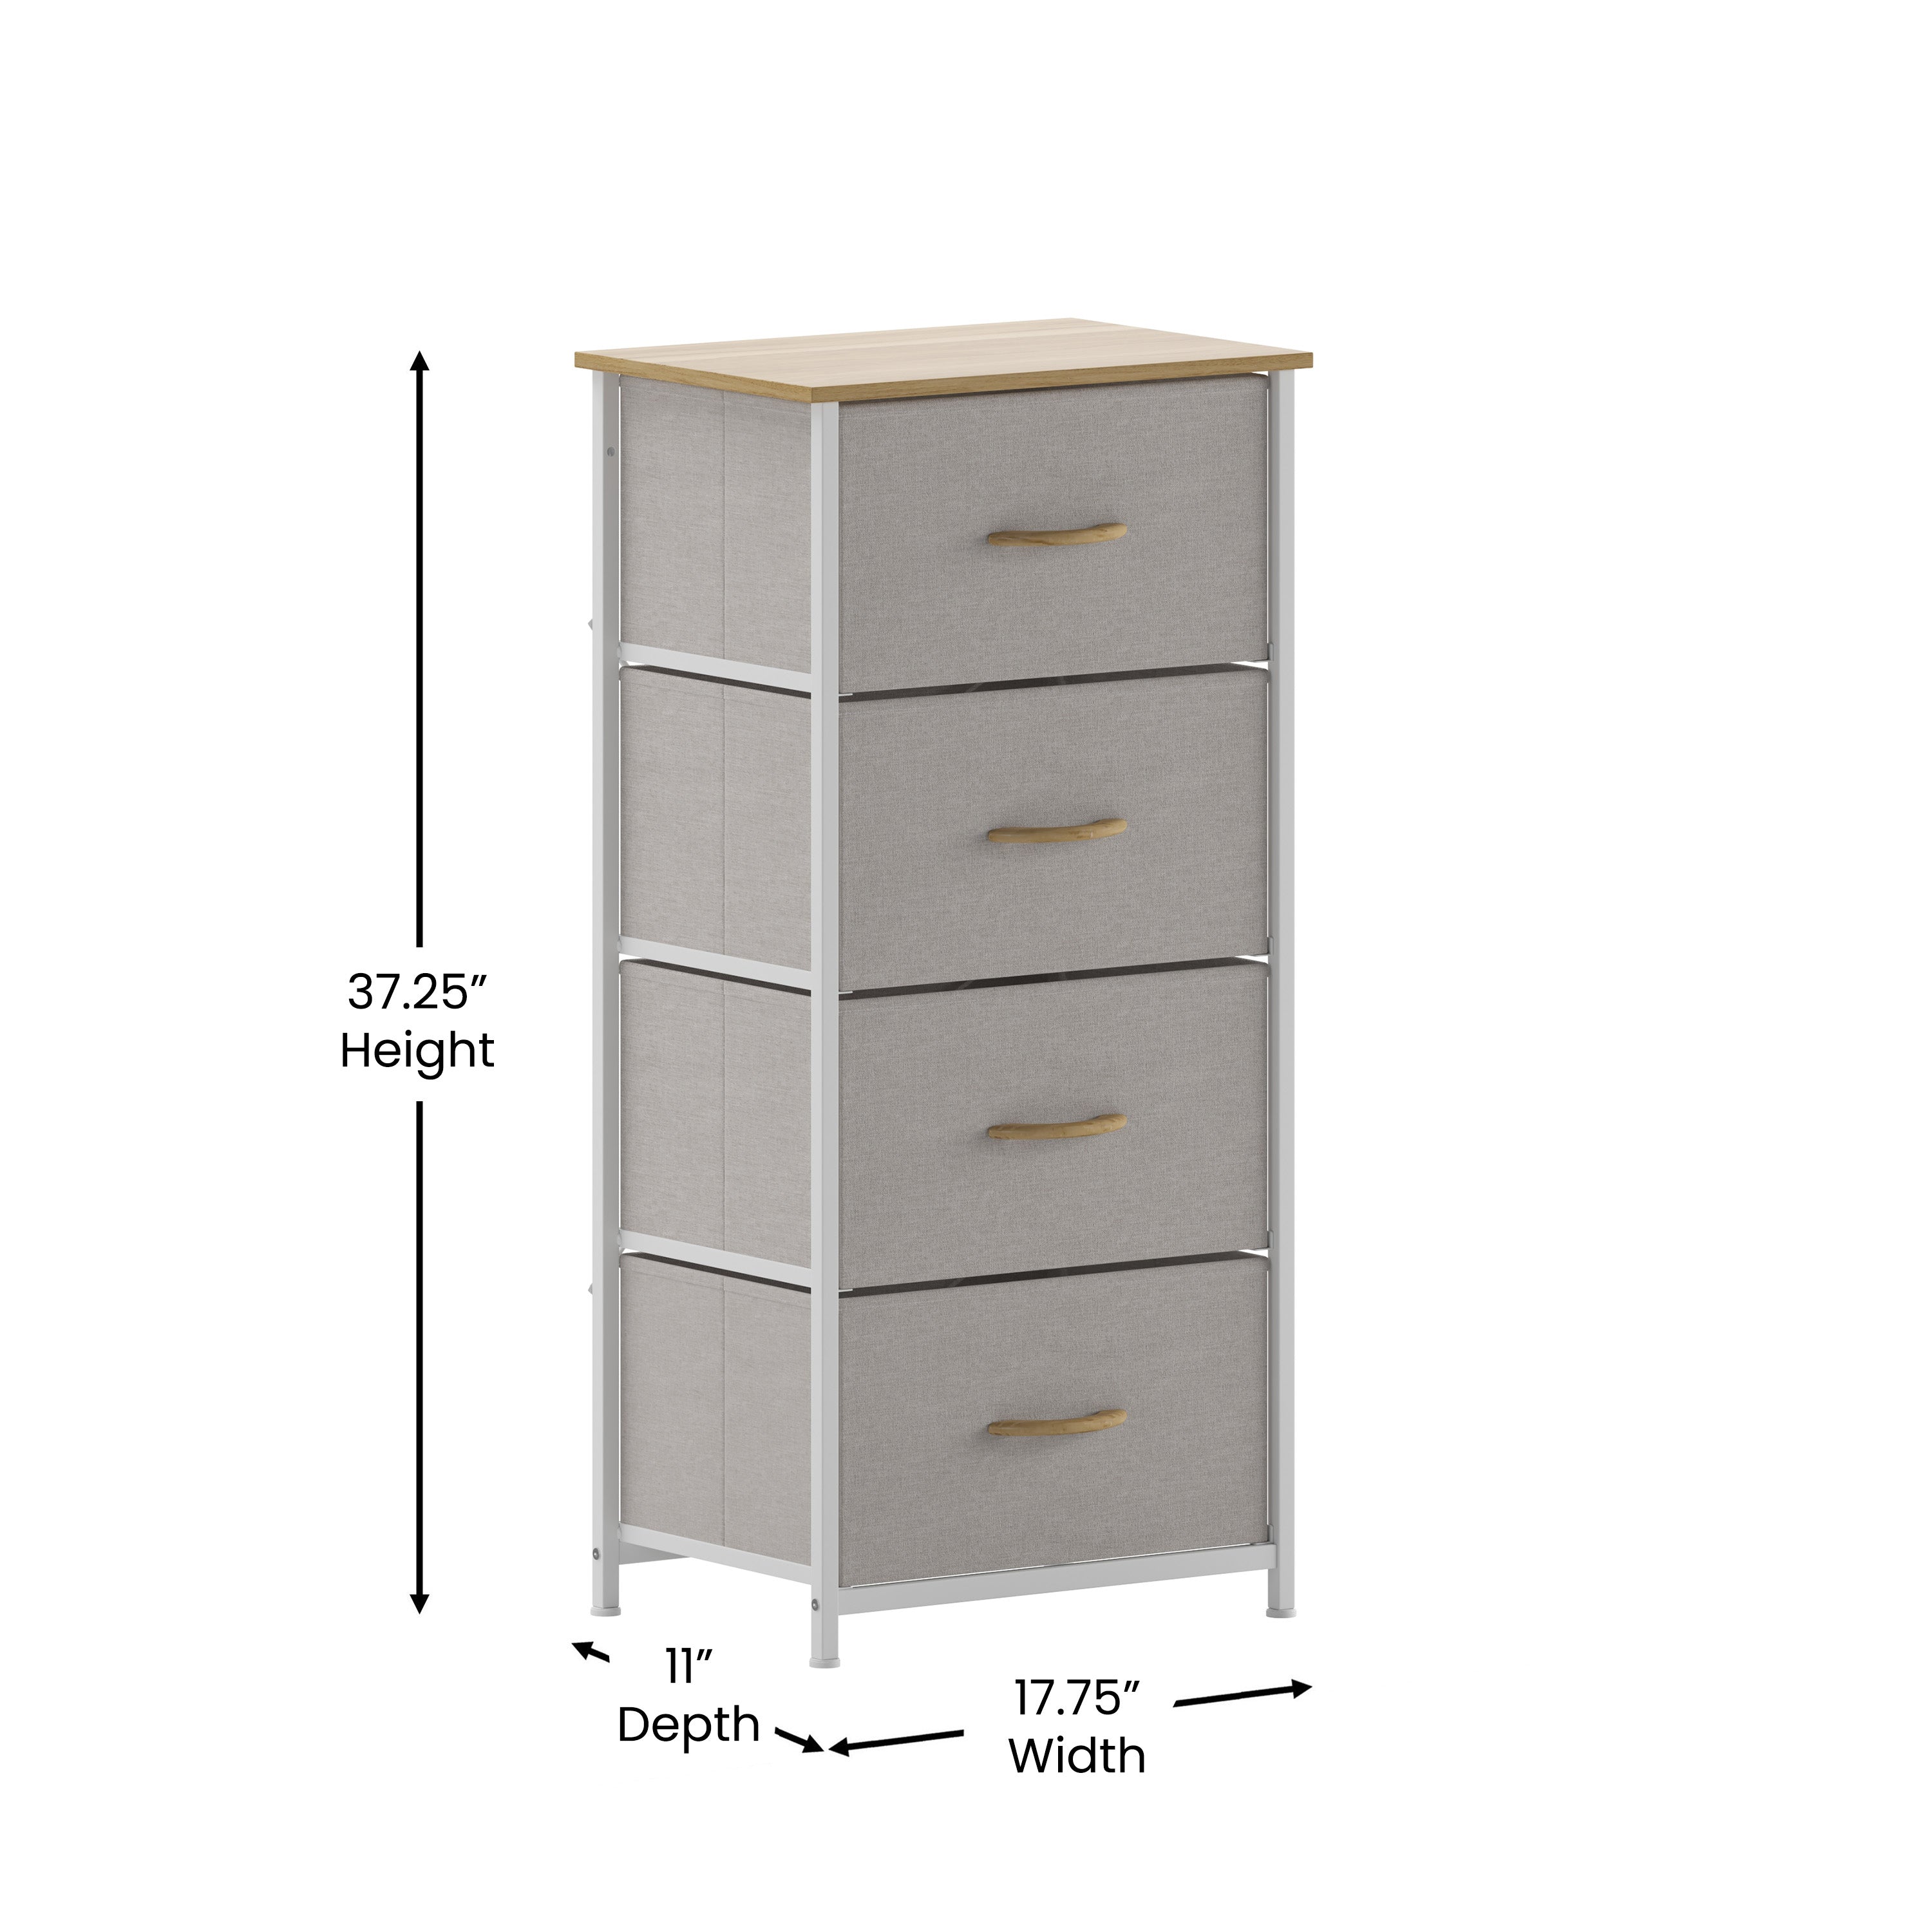 Harris 4 Drawer Vertical Storage Dresser with Cast Iron Frame, Wood Top and Easy Pull Fabric Drawers with Wooden Handles-Dresser-Flash Furniture-Wall2Wall Furnishings